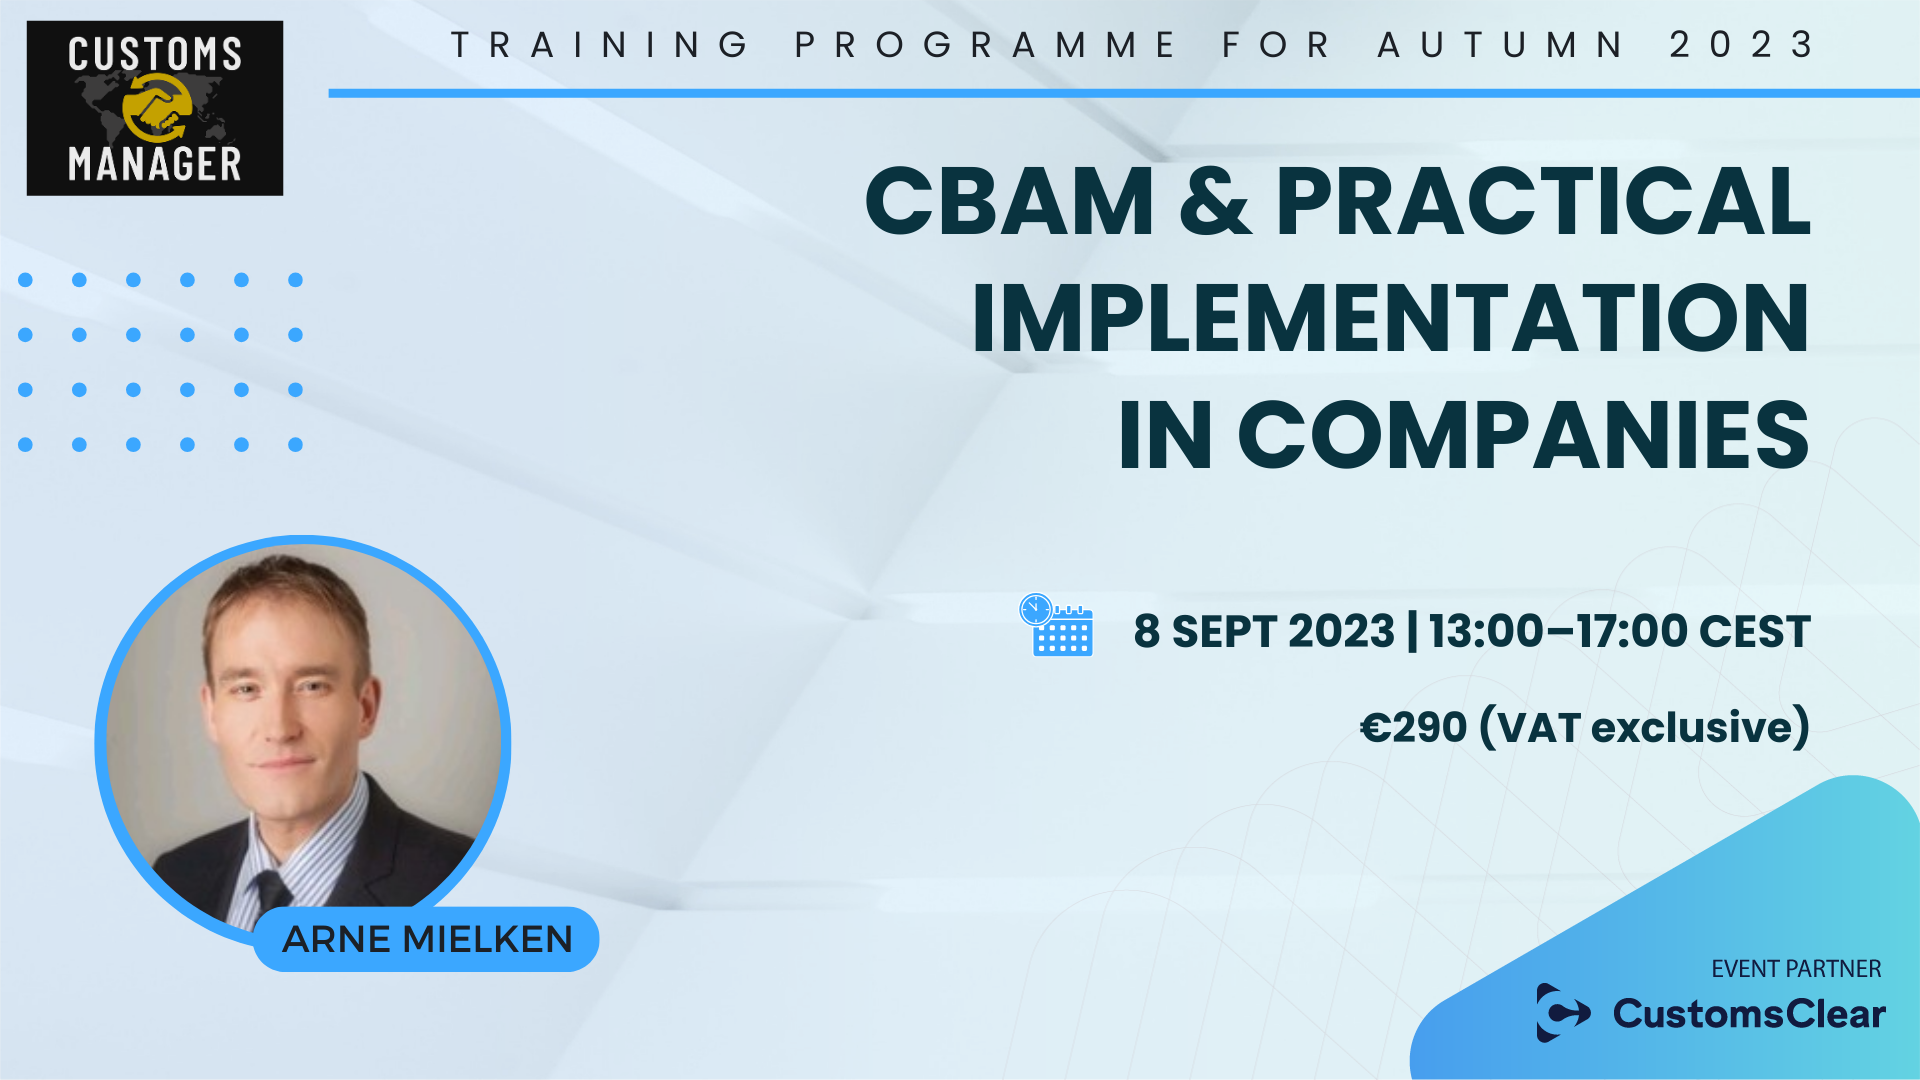 CBAM & Practical Implementation in Companies